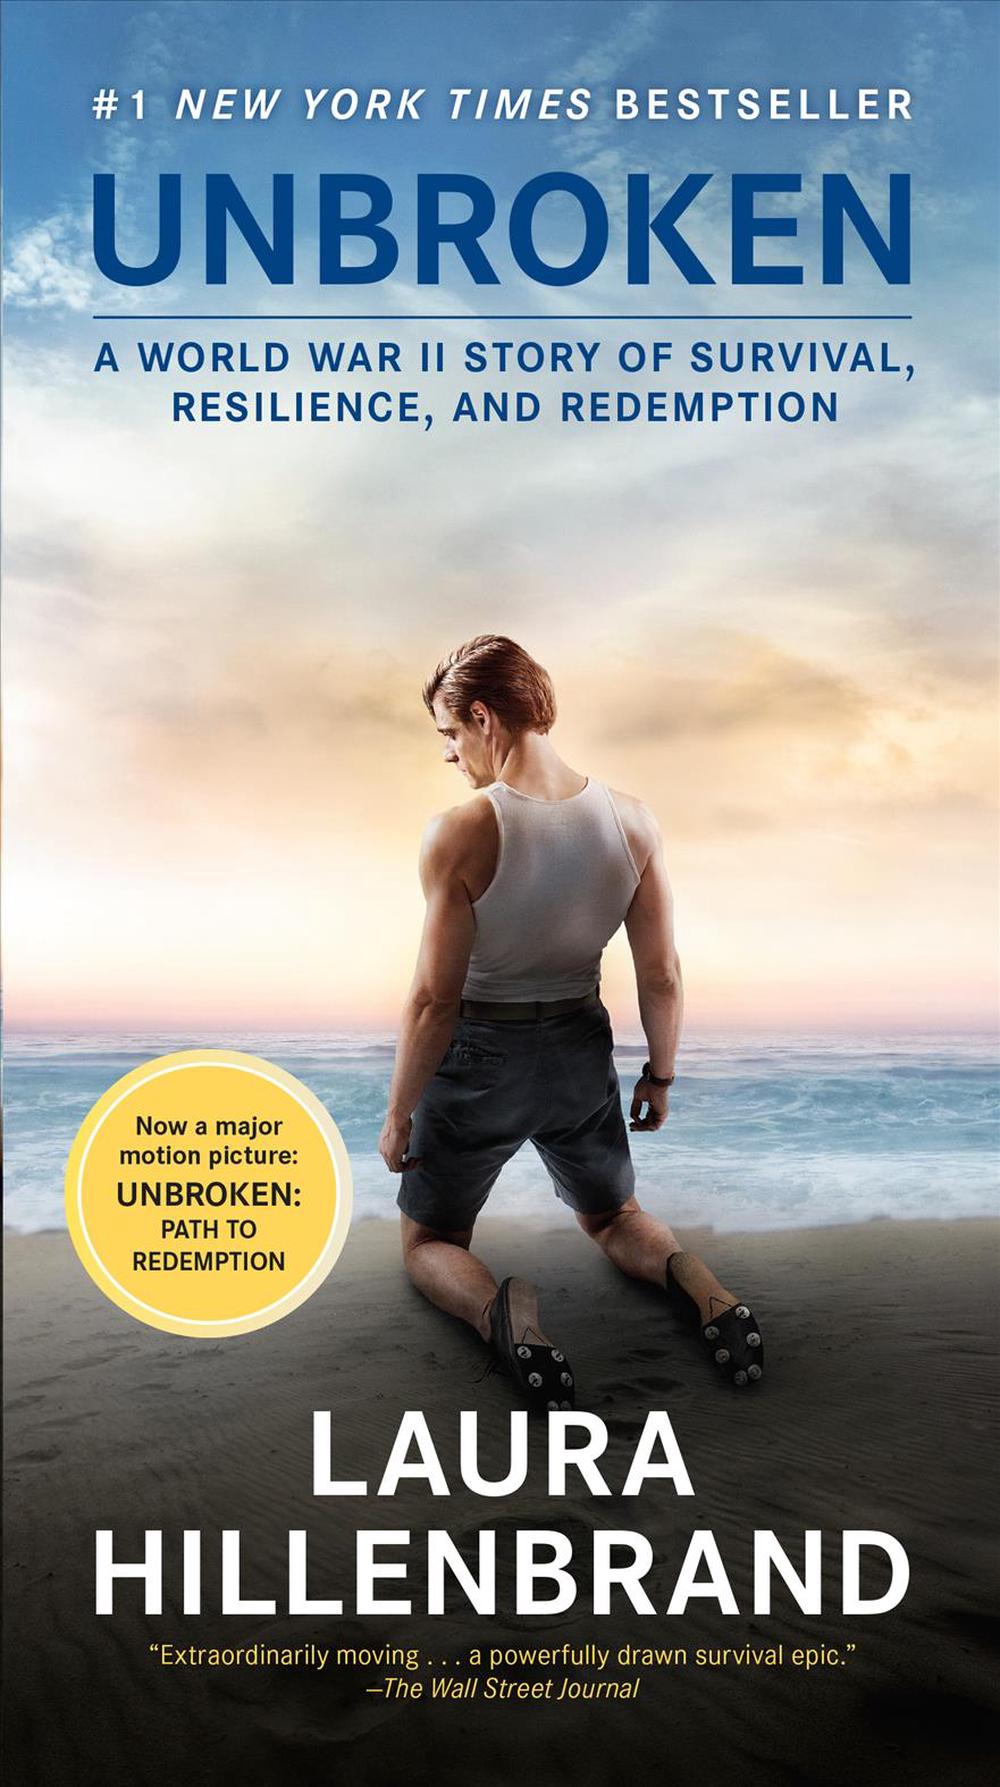 Unbroken (Movie Tie-In Edition): A World War II Story of Survival, Resilience, a 9781984818447 ...